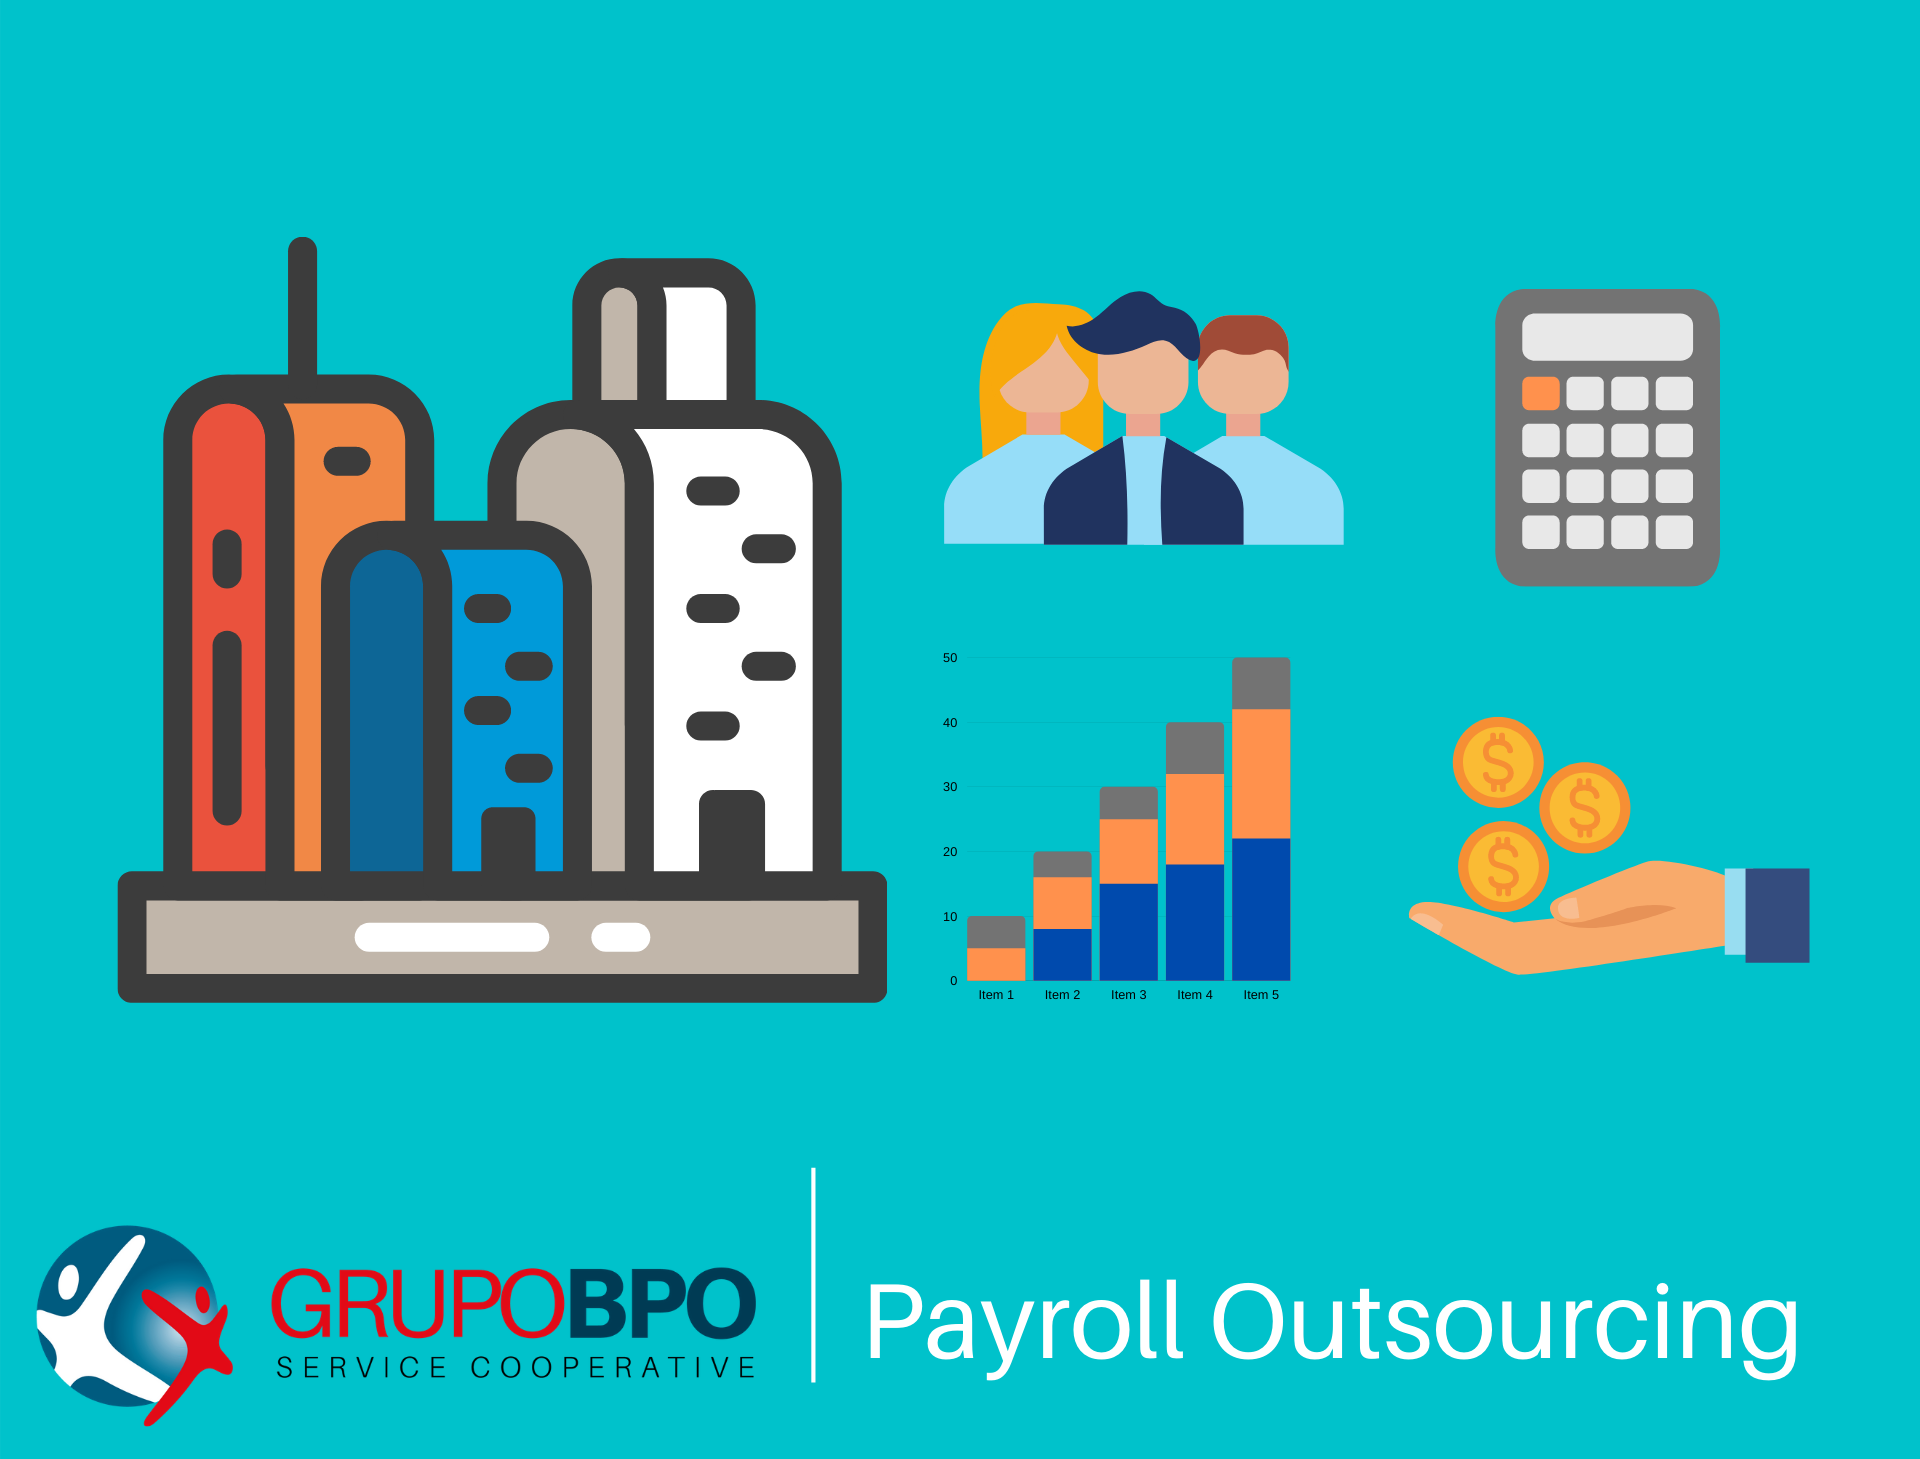 Payroll Services in the Philippines are In-Demand in these Segments